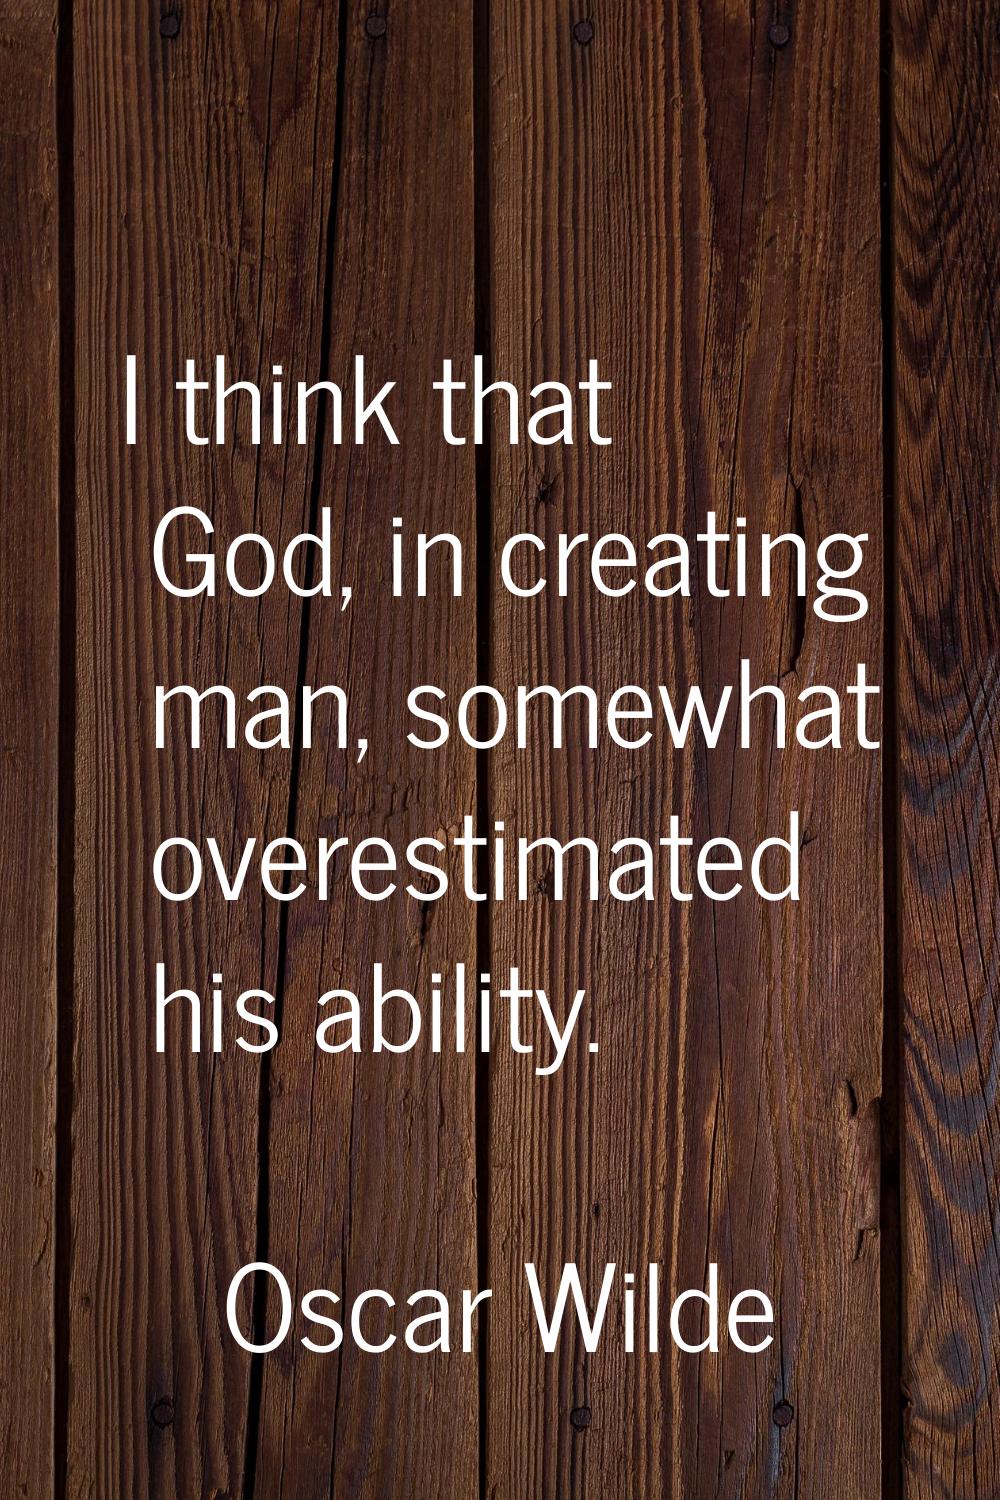 I think that God, in creating man, somewhat overestimated his ability.